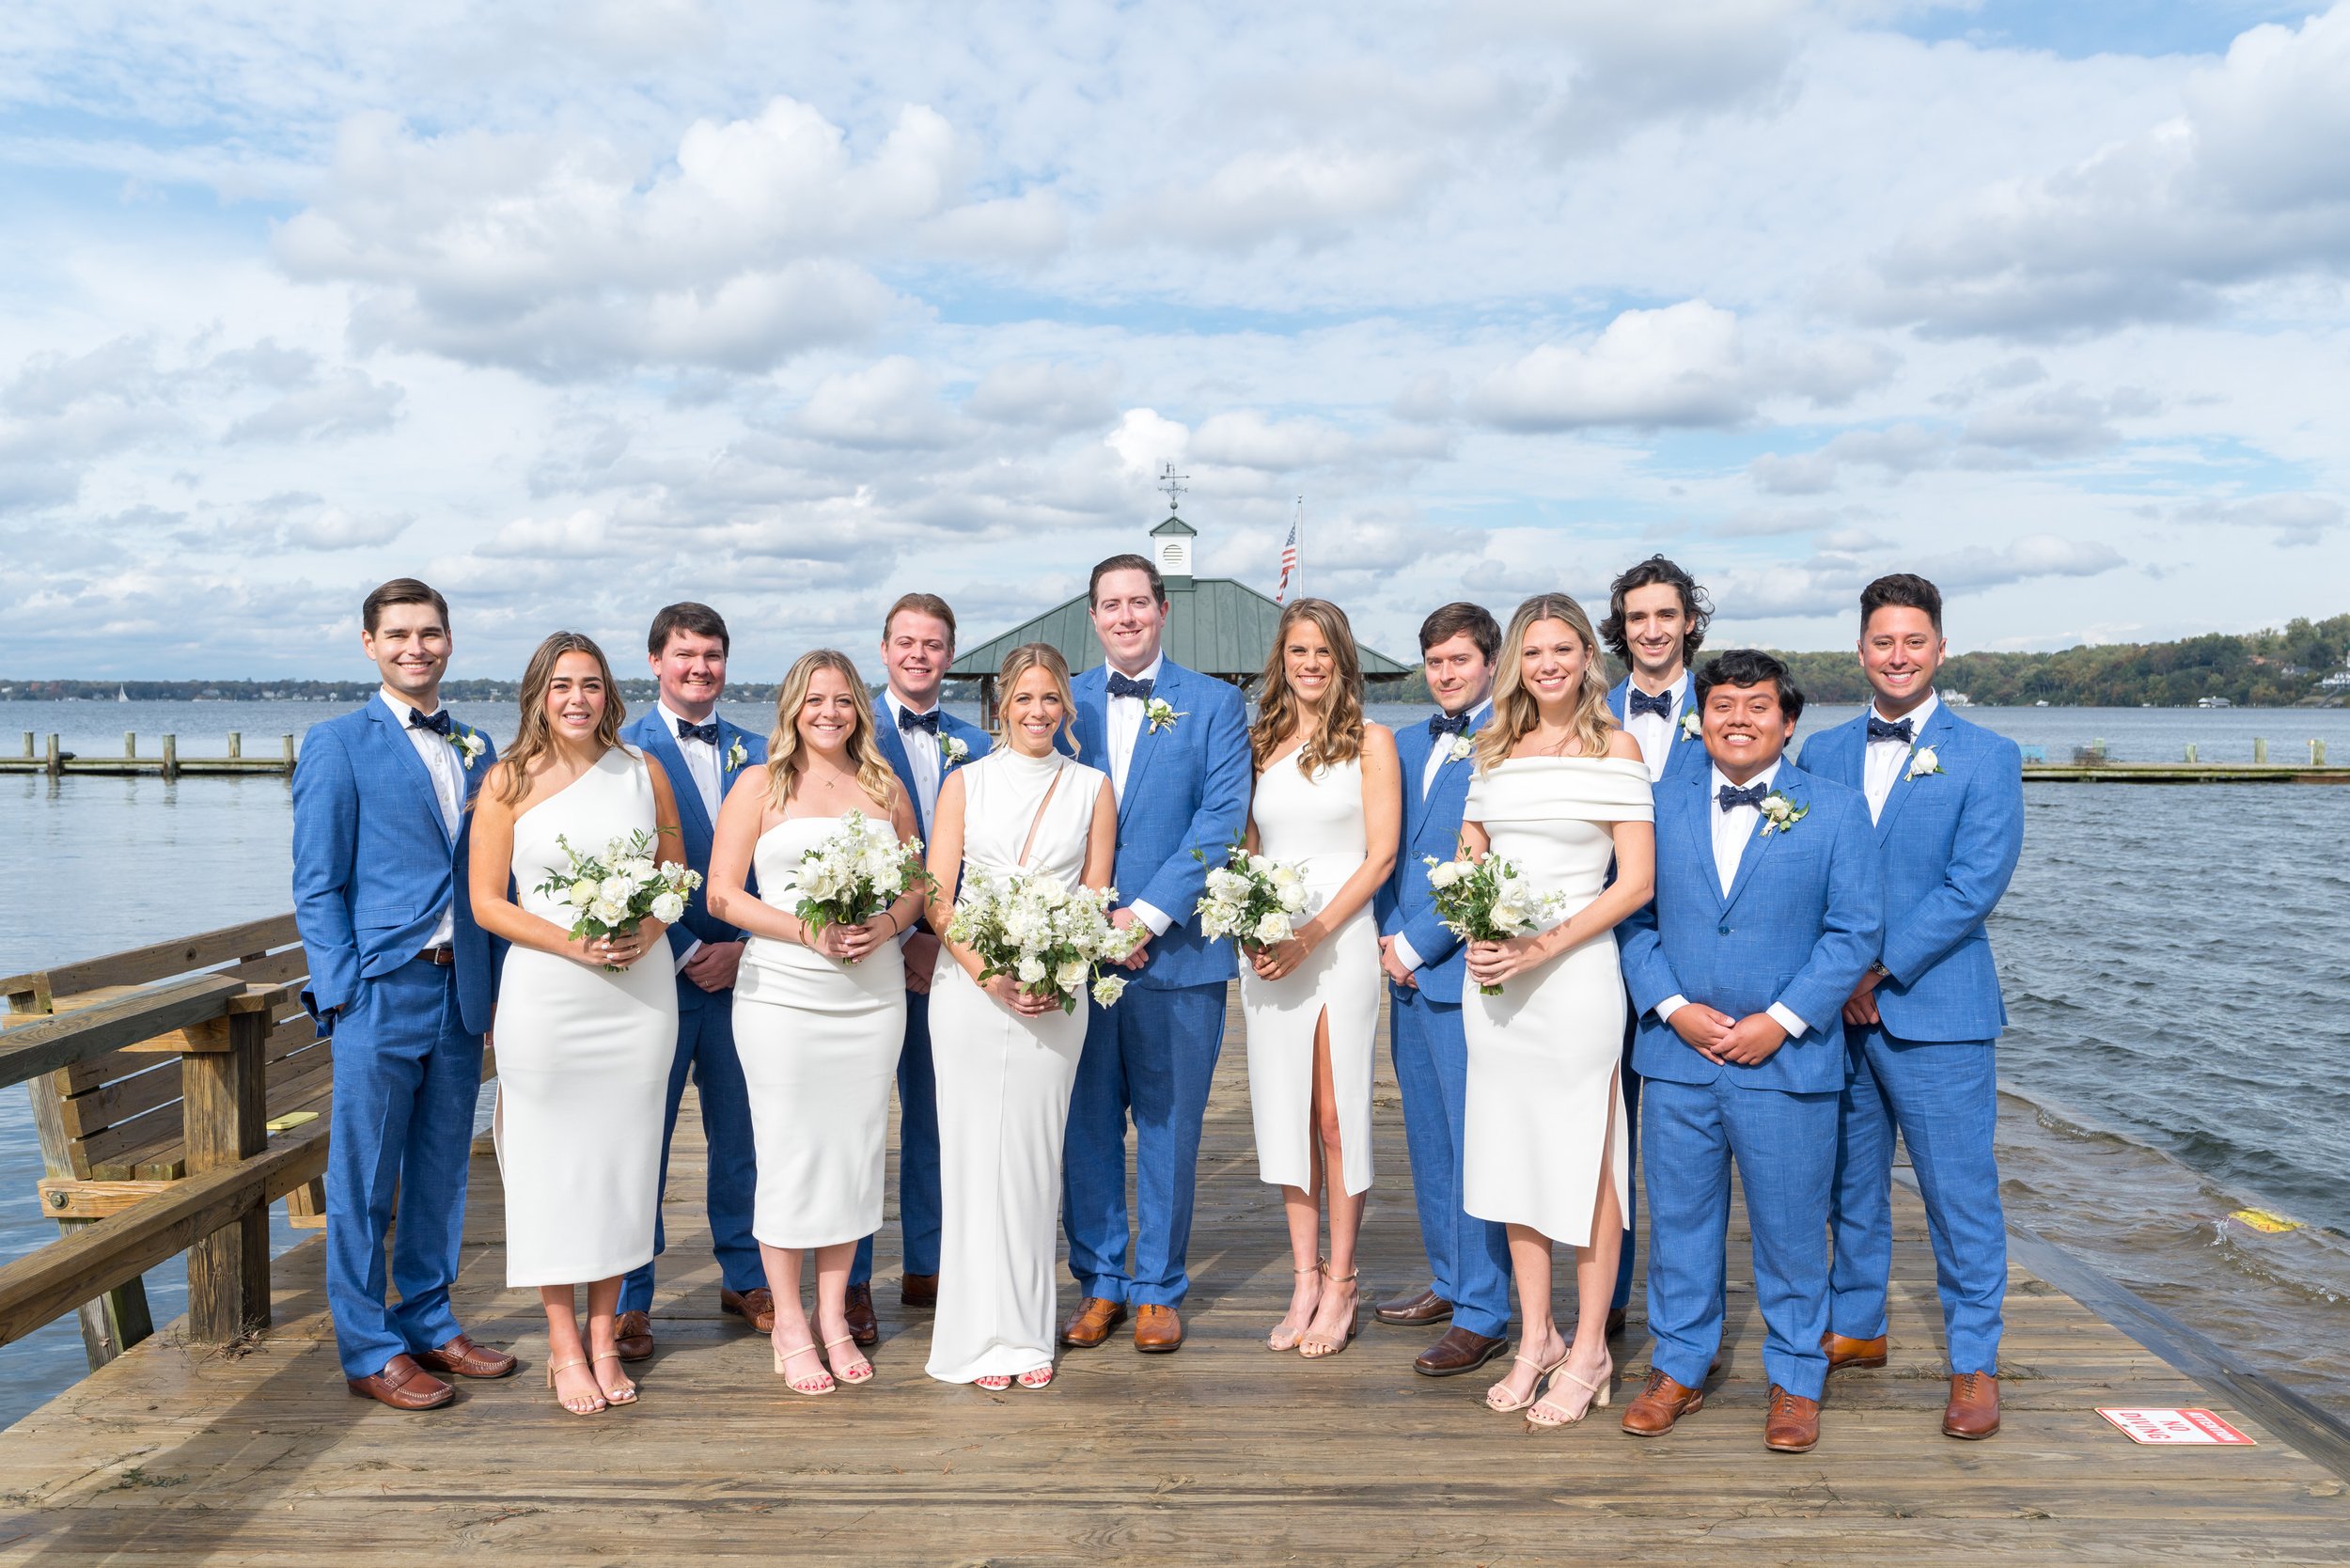 Bride and groom and wedding party in blue suits and white dresses